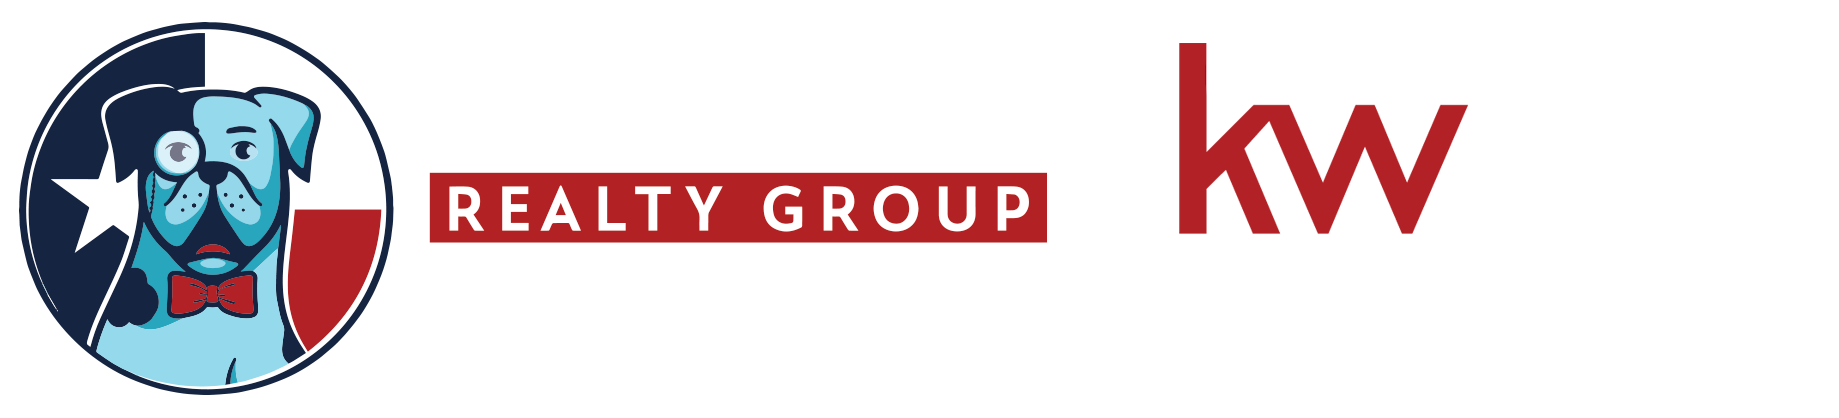 Shared Vision Realty Group